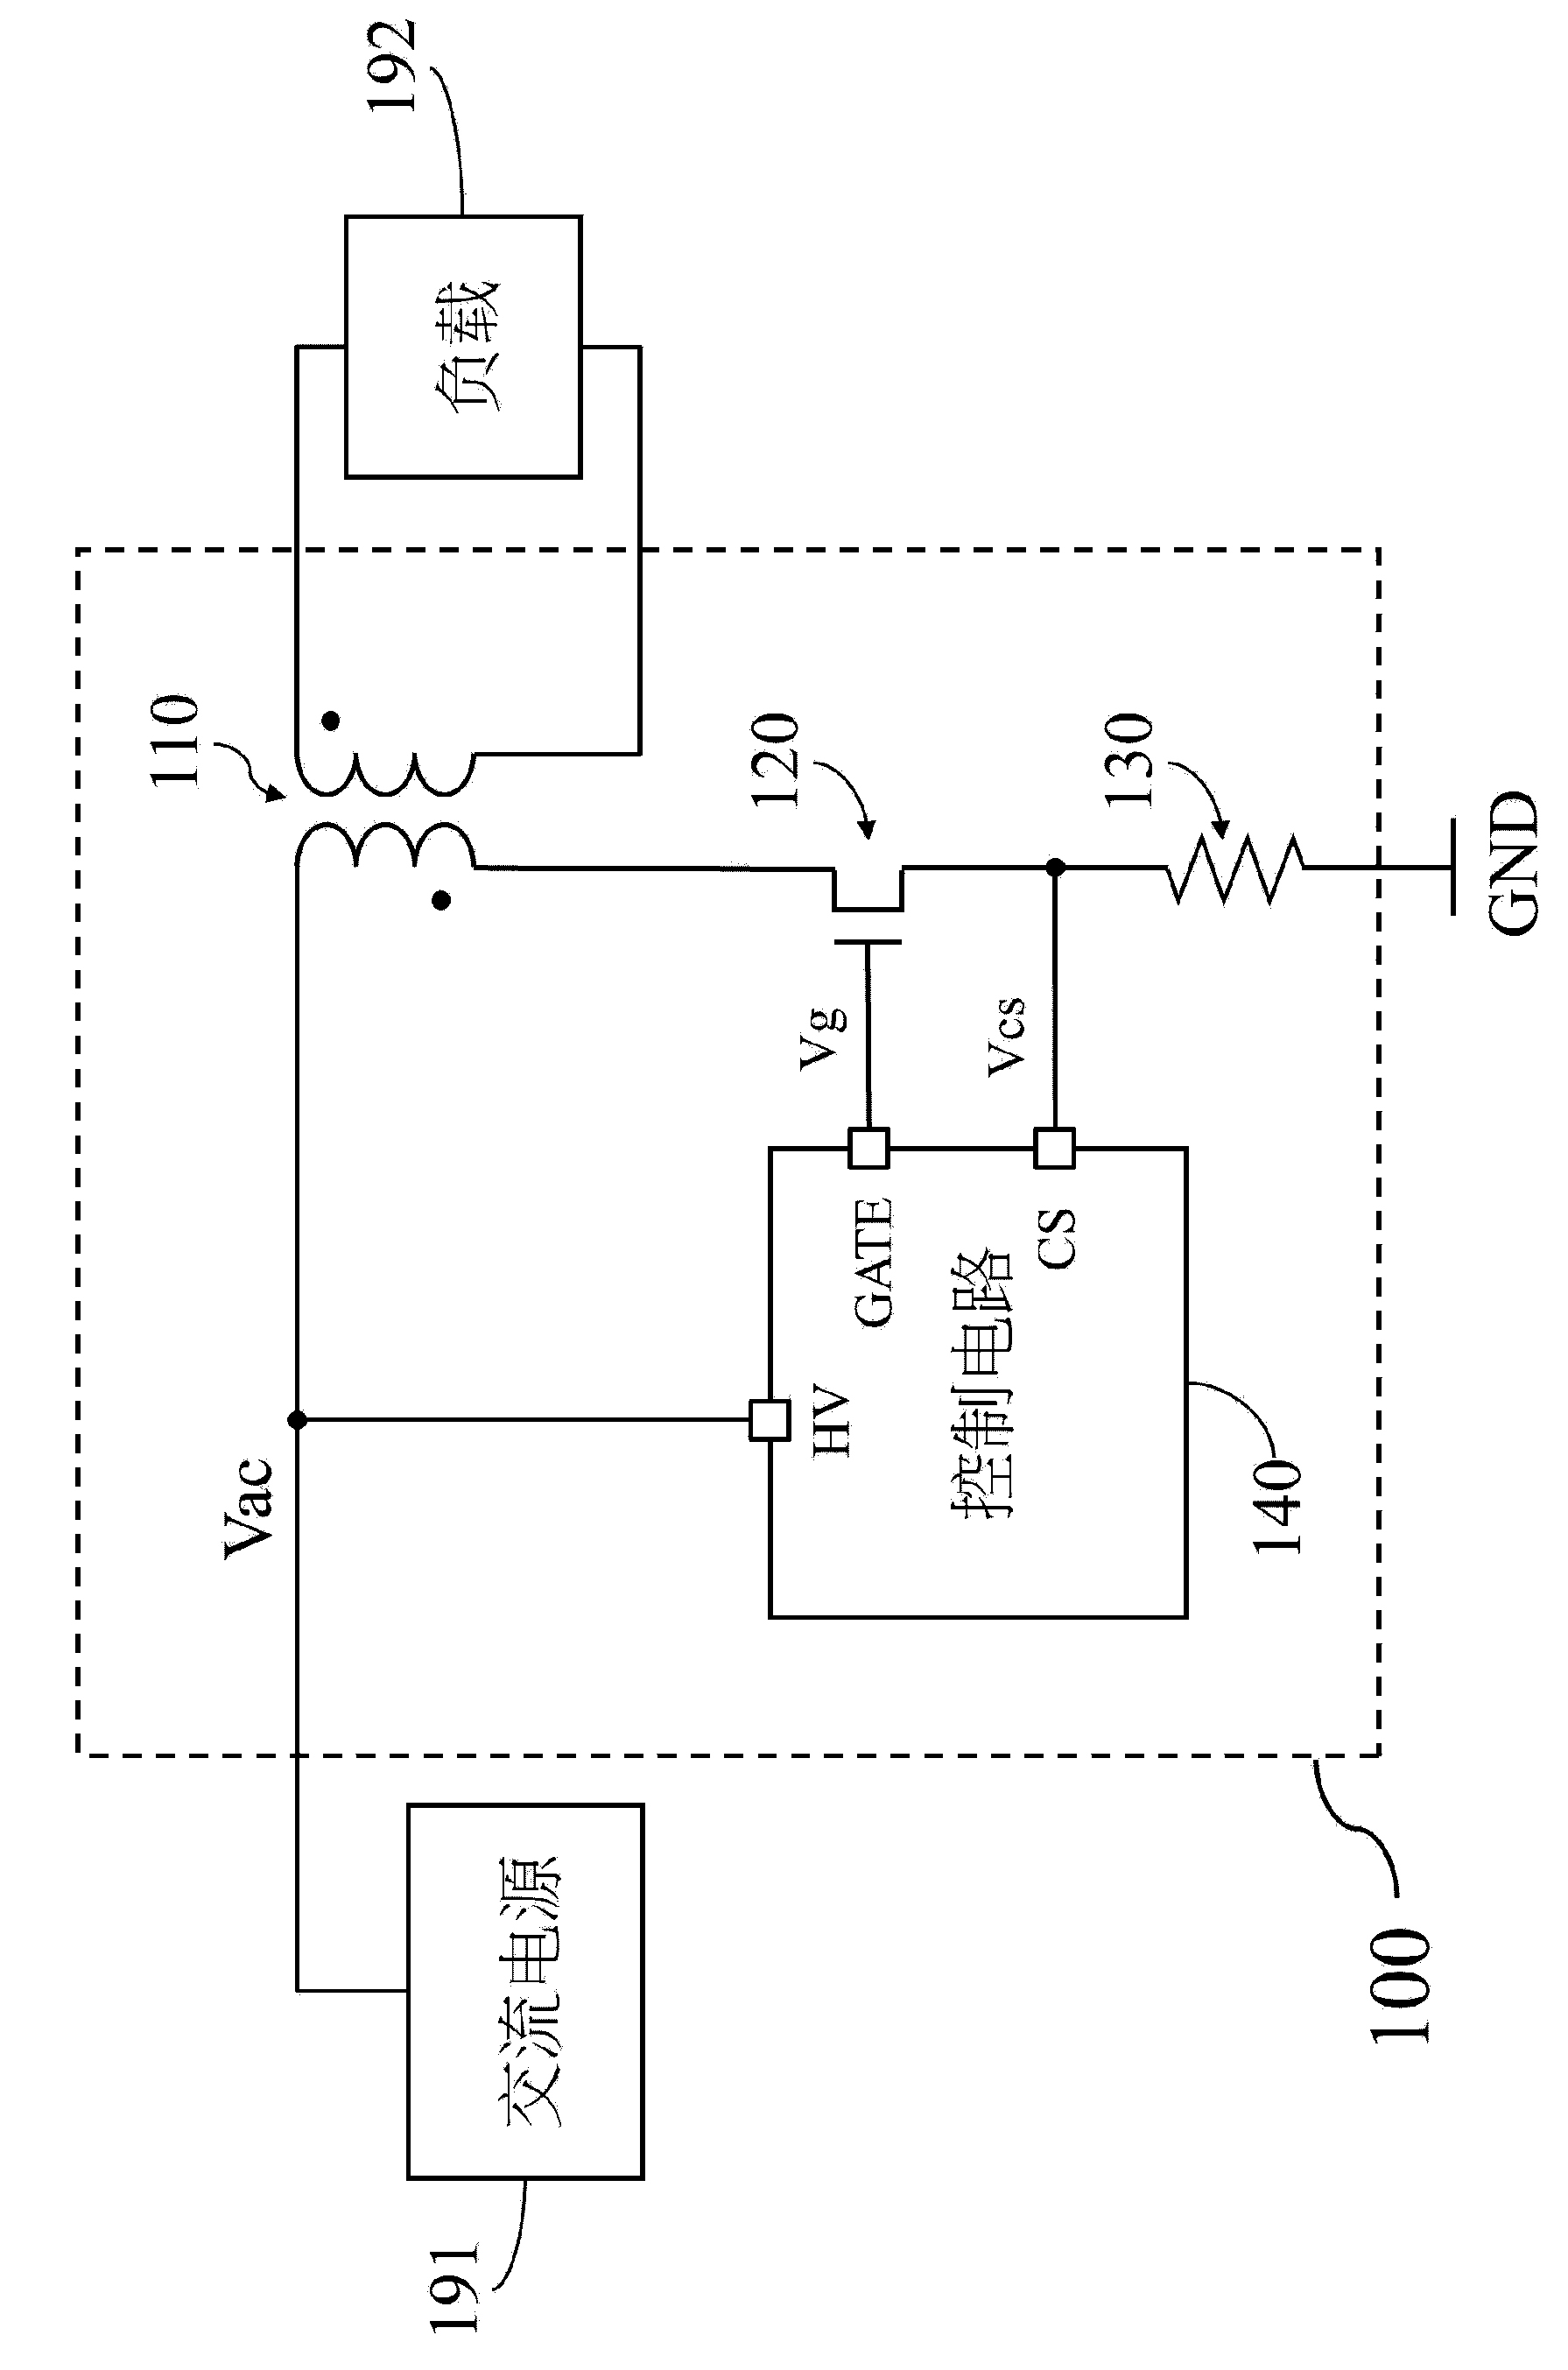 Control circuit of alternating current-to-direct current converter